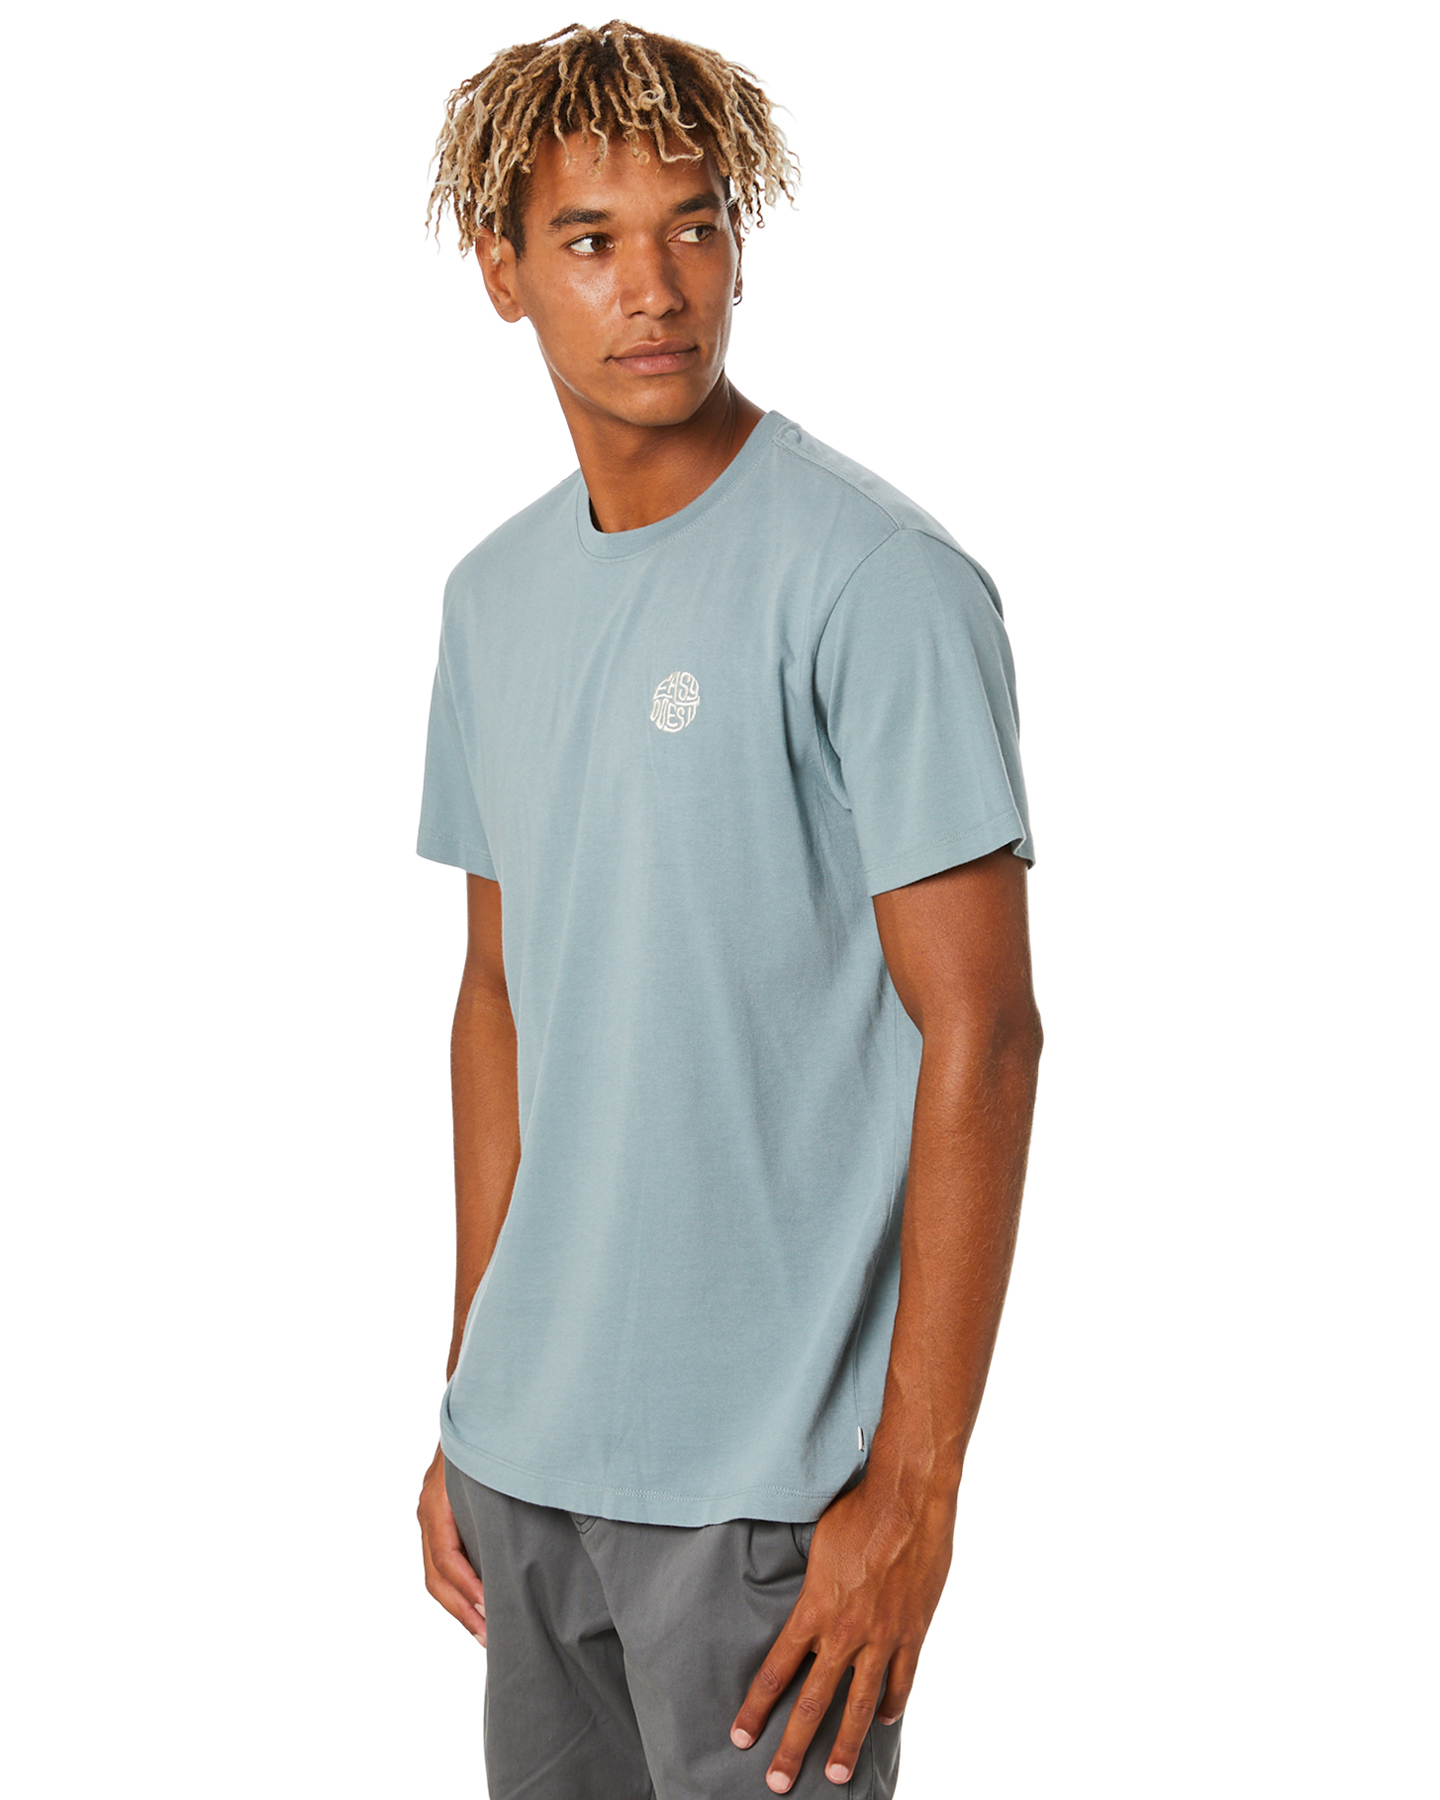 Katin Easy Does It Mens Tee - Light Blue | SurfStitch